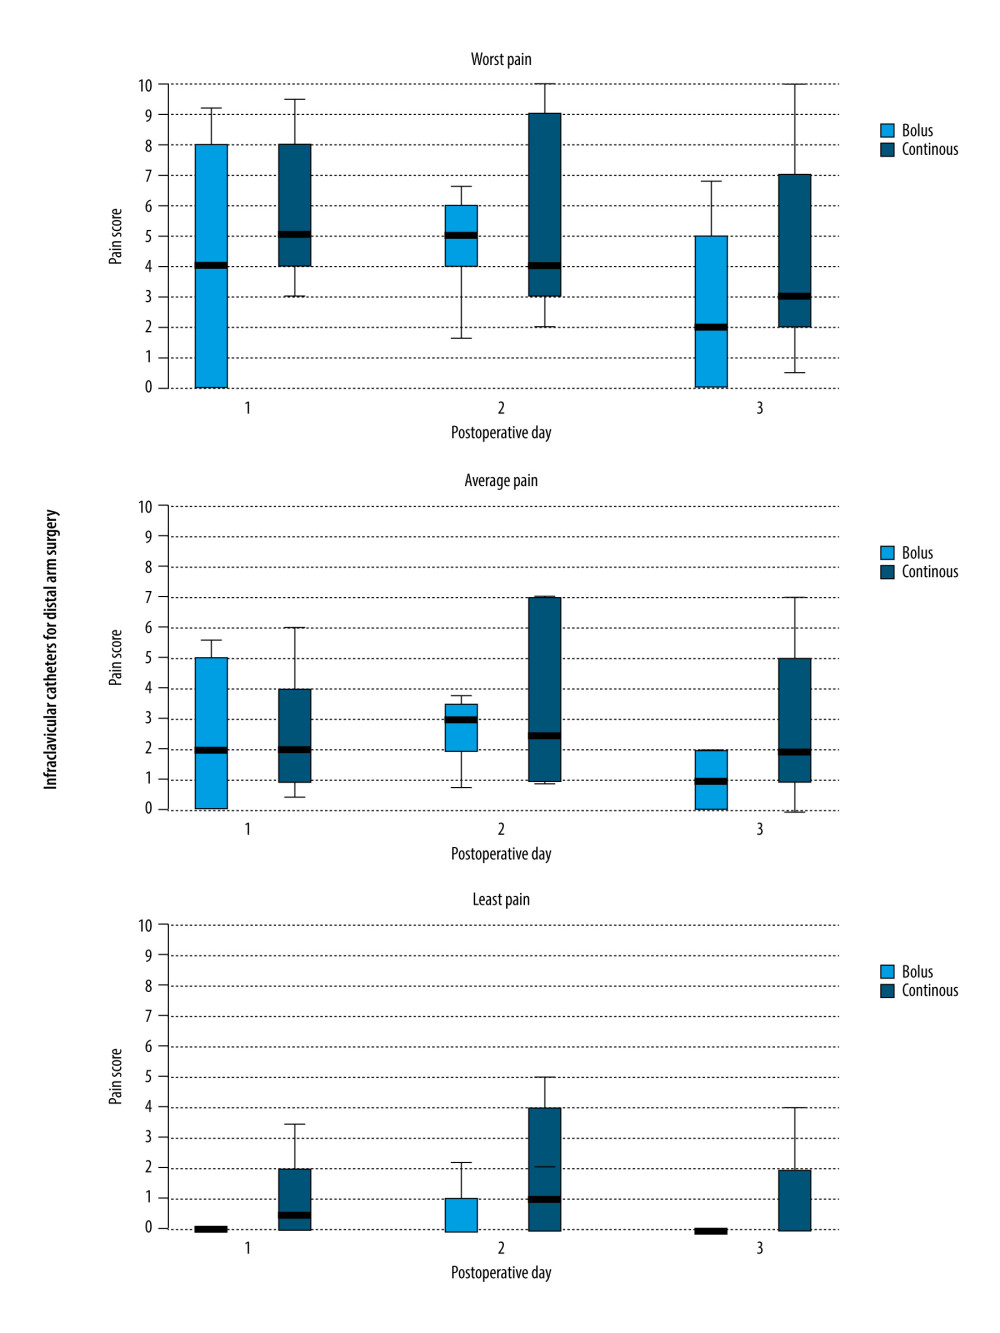 Worst, average, and lowest pain scores during the first 3 days following wrist/hand surgery with an infraclavicular brachial plexus catheter and ropivacaine administered by either automated boluses or continuous infusion. Data is expressed as median (horizontal bar), 25th to 75th percentile (box), and 10th to 90th percentile (whiskers), and statistics were not applied owing to the small sample size.